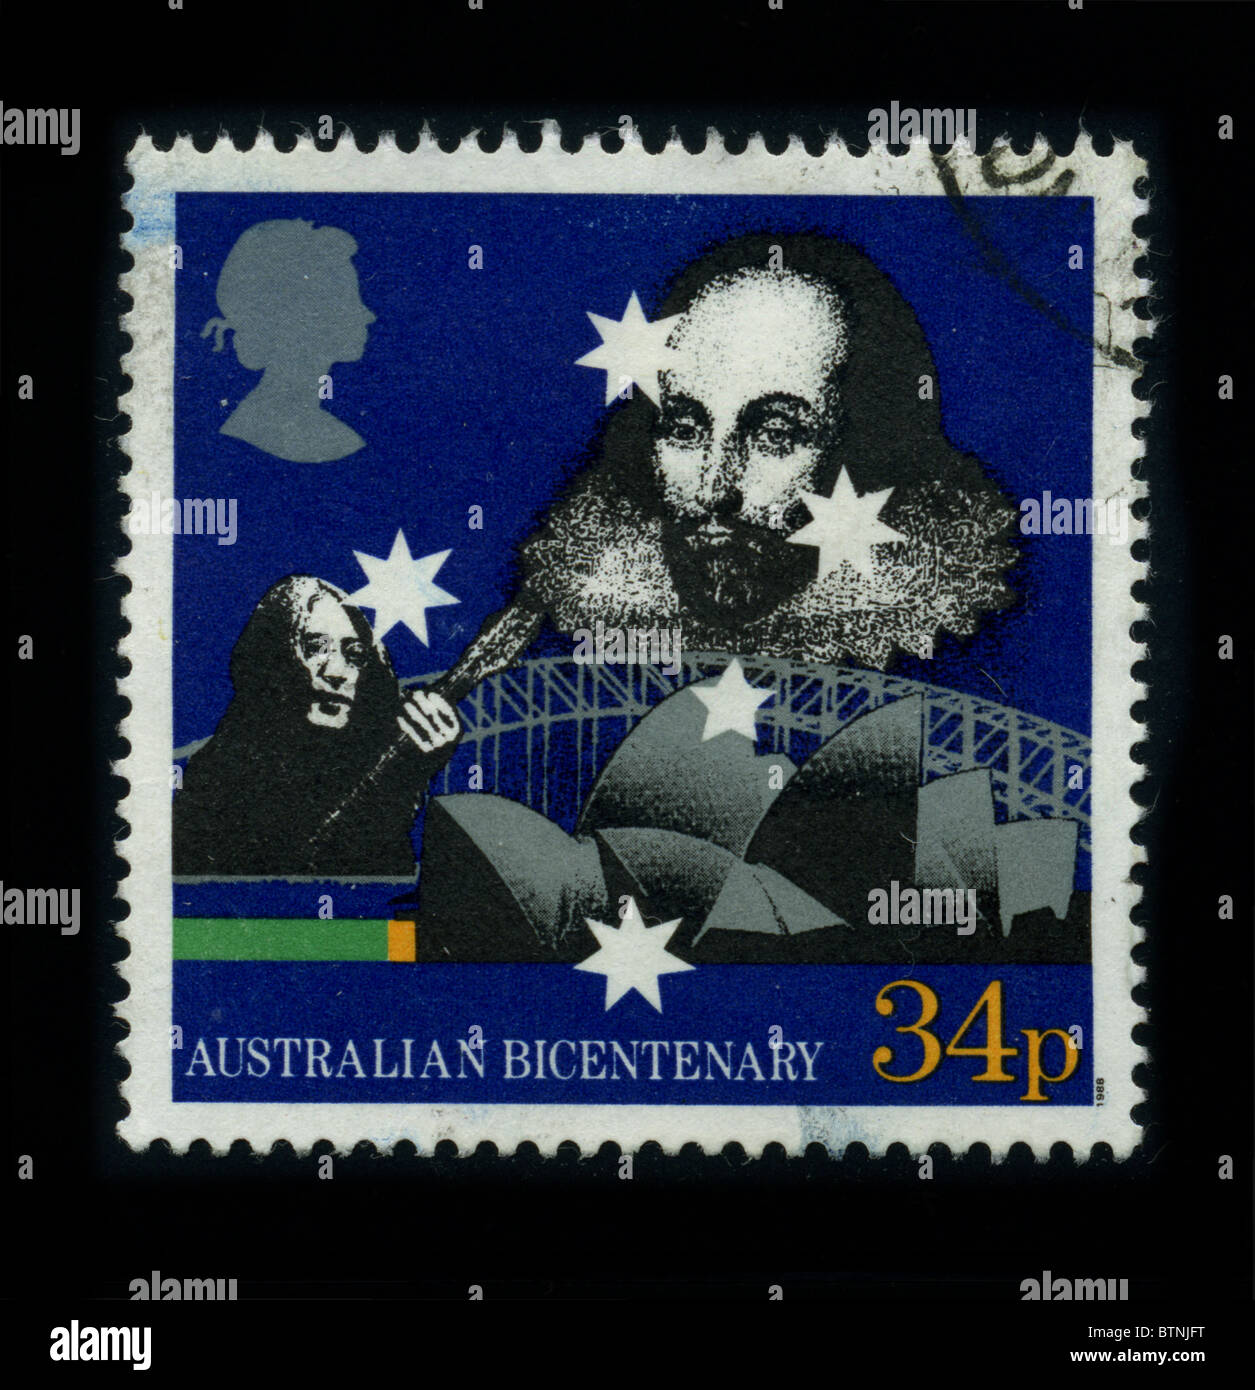 AUSTRALIA - CIRCA 1980: A stamp printed in AUSTRALIA shows image of the dedicated to the bicentenary of Australia was celebrated in 1970 on the 200th anniversary of Captain James Cook landing and claiming the land, and again in 1988 to celebrate 200 years of permanent European settlement, circa 1980. Stock Photo